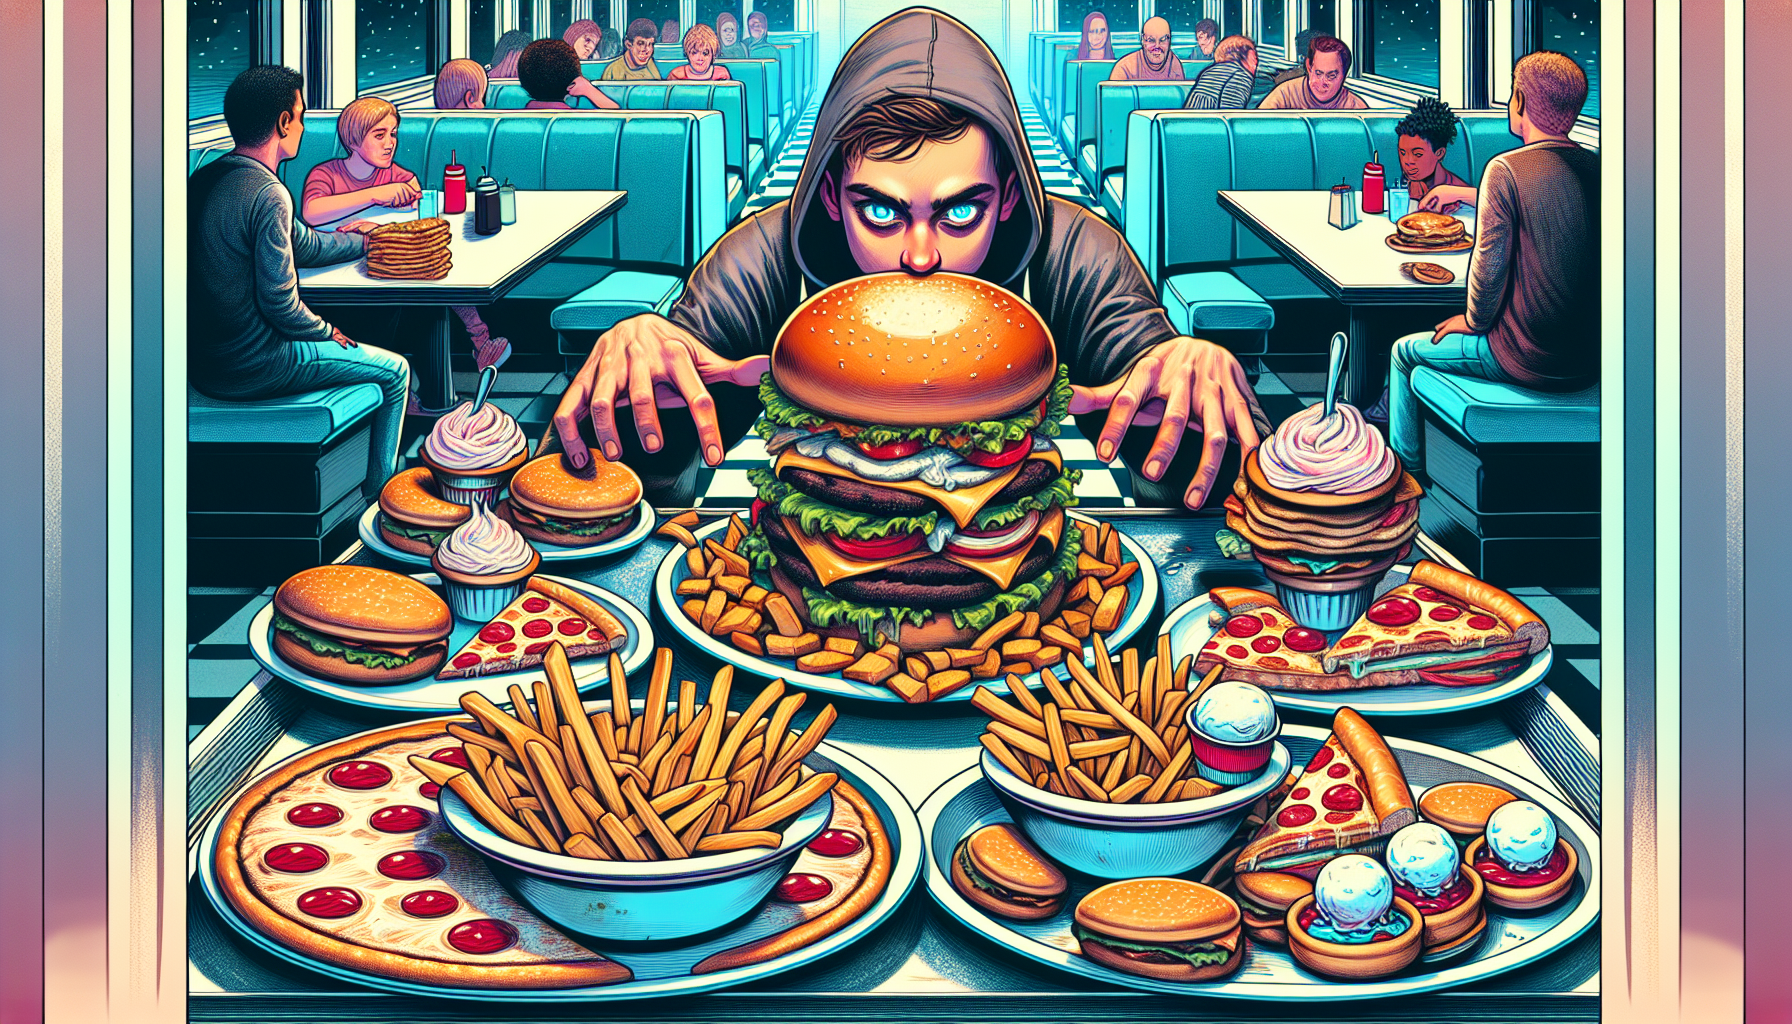 Illustration of a person eating large quantities of food during a dirty bulk